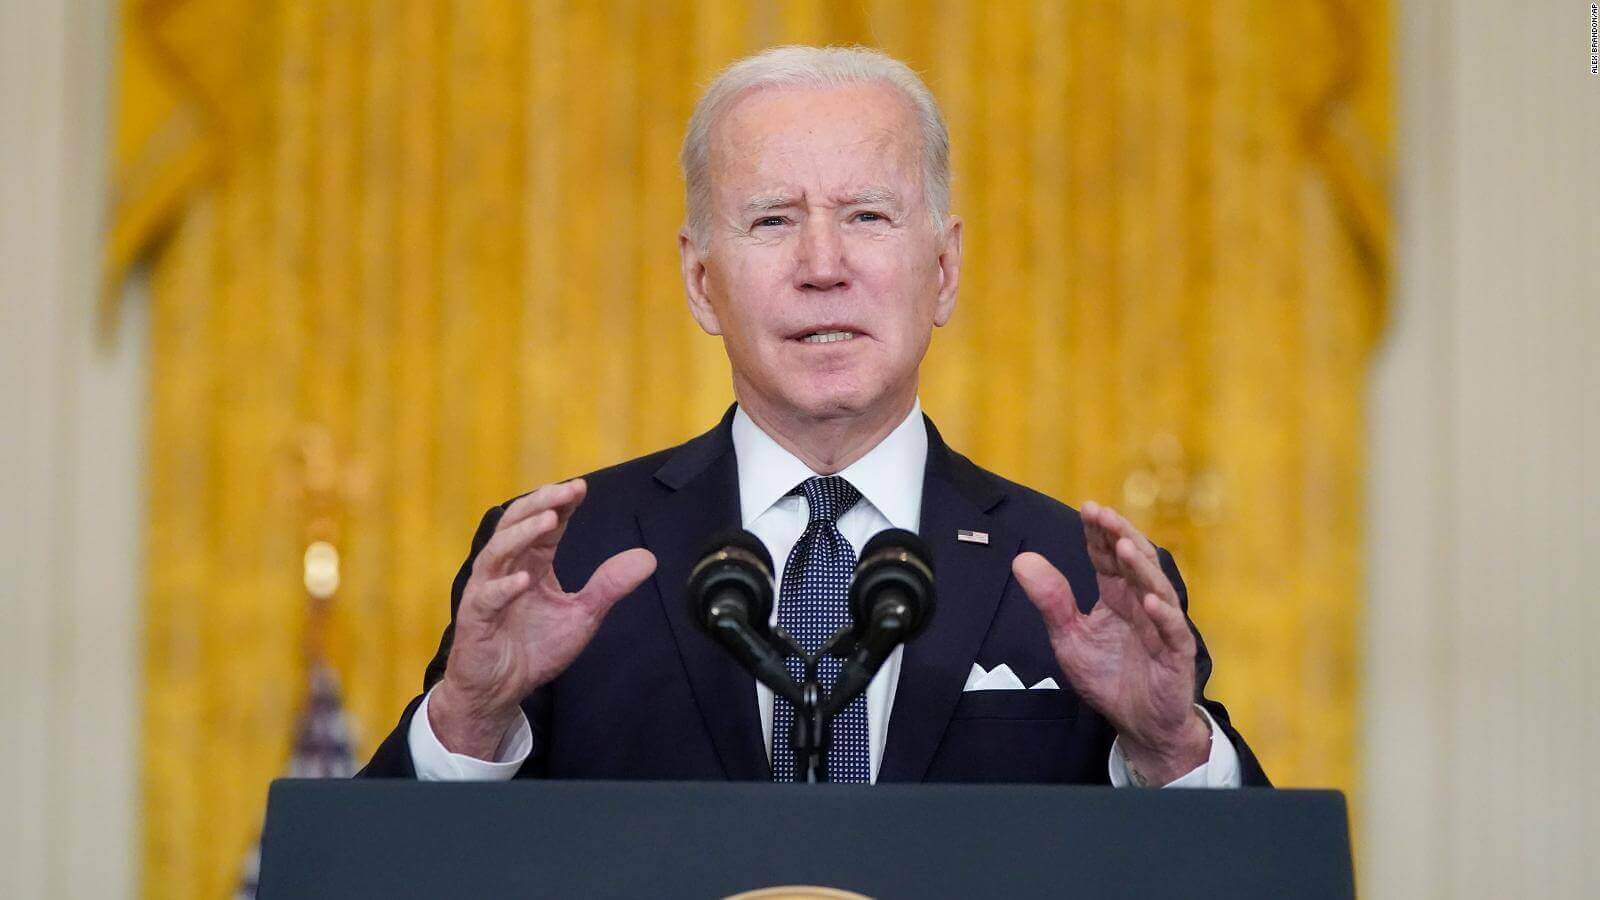 Biden Proclaims US, NATO, Ukraine “Not a Threat” to Russia, Urges End to “War of Choice”